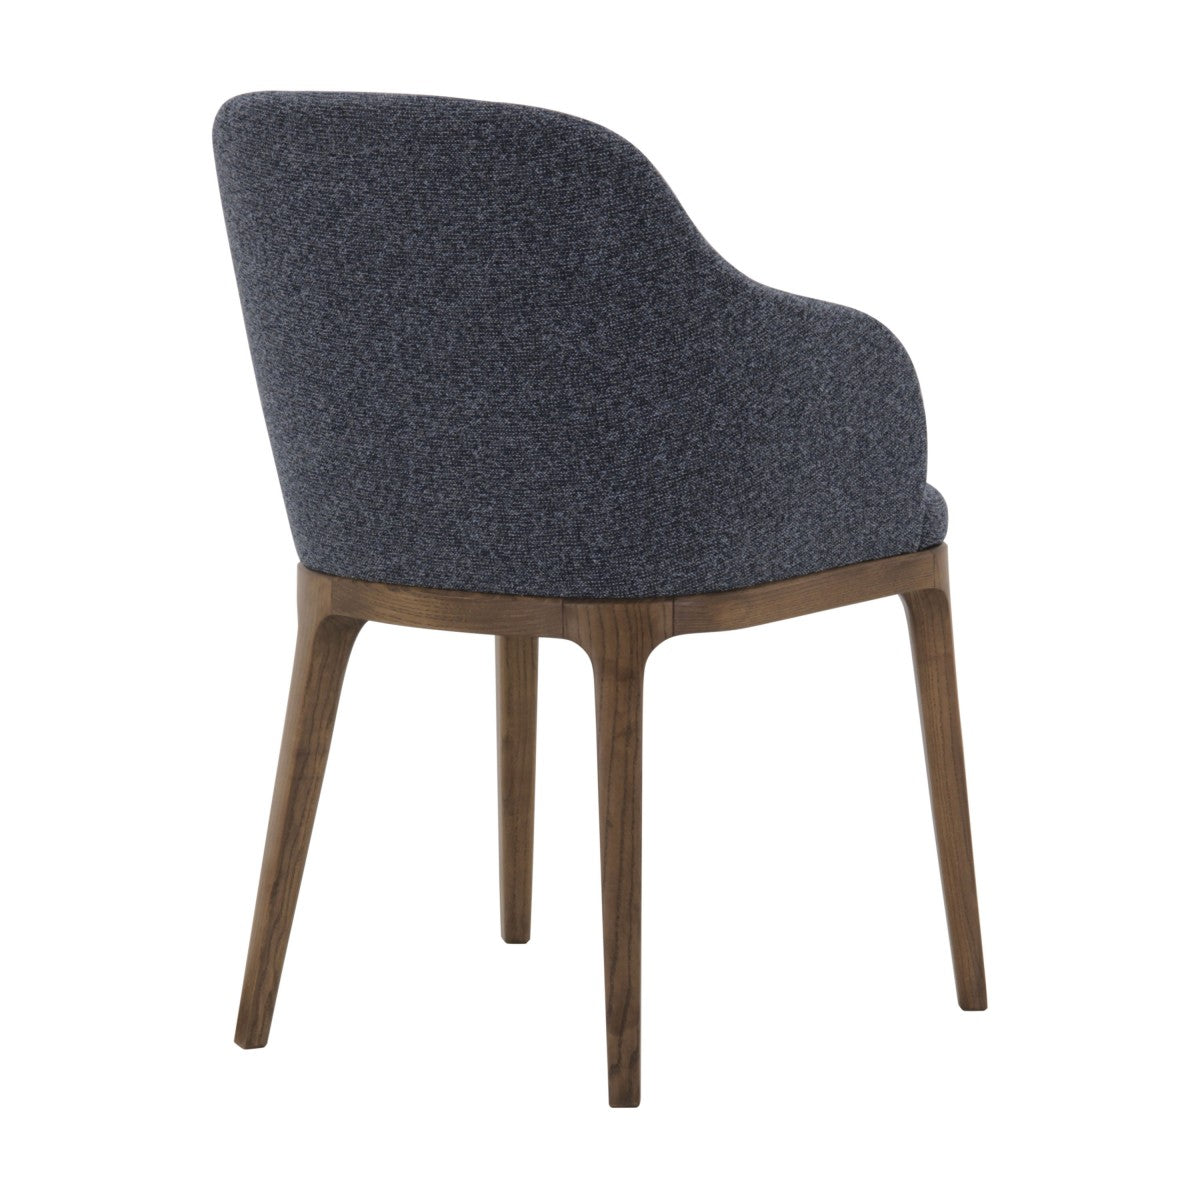 Carmela Bespoke Upholstered Modern Contemporary Dining Armchair Chair MS020A Custom Made To Order